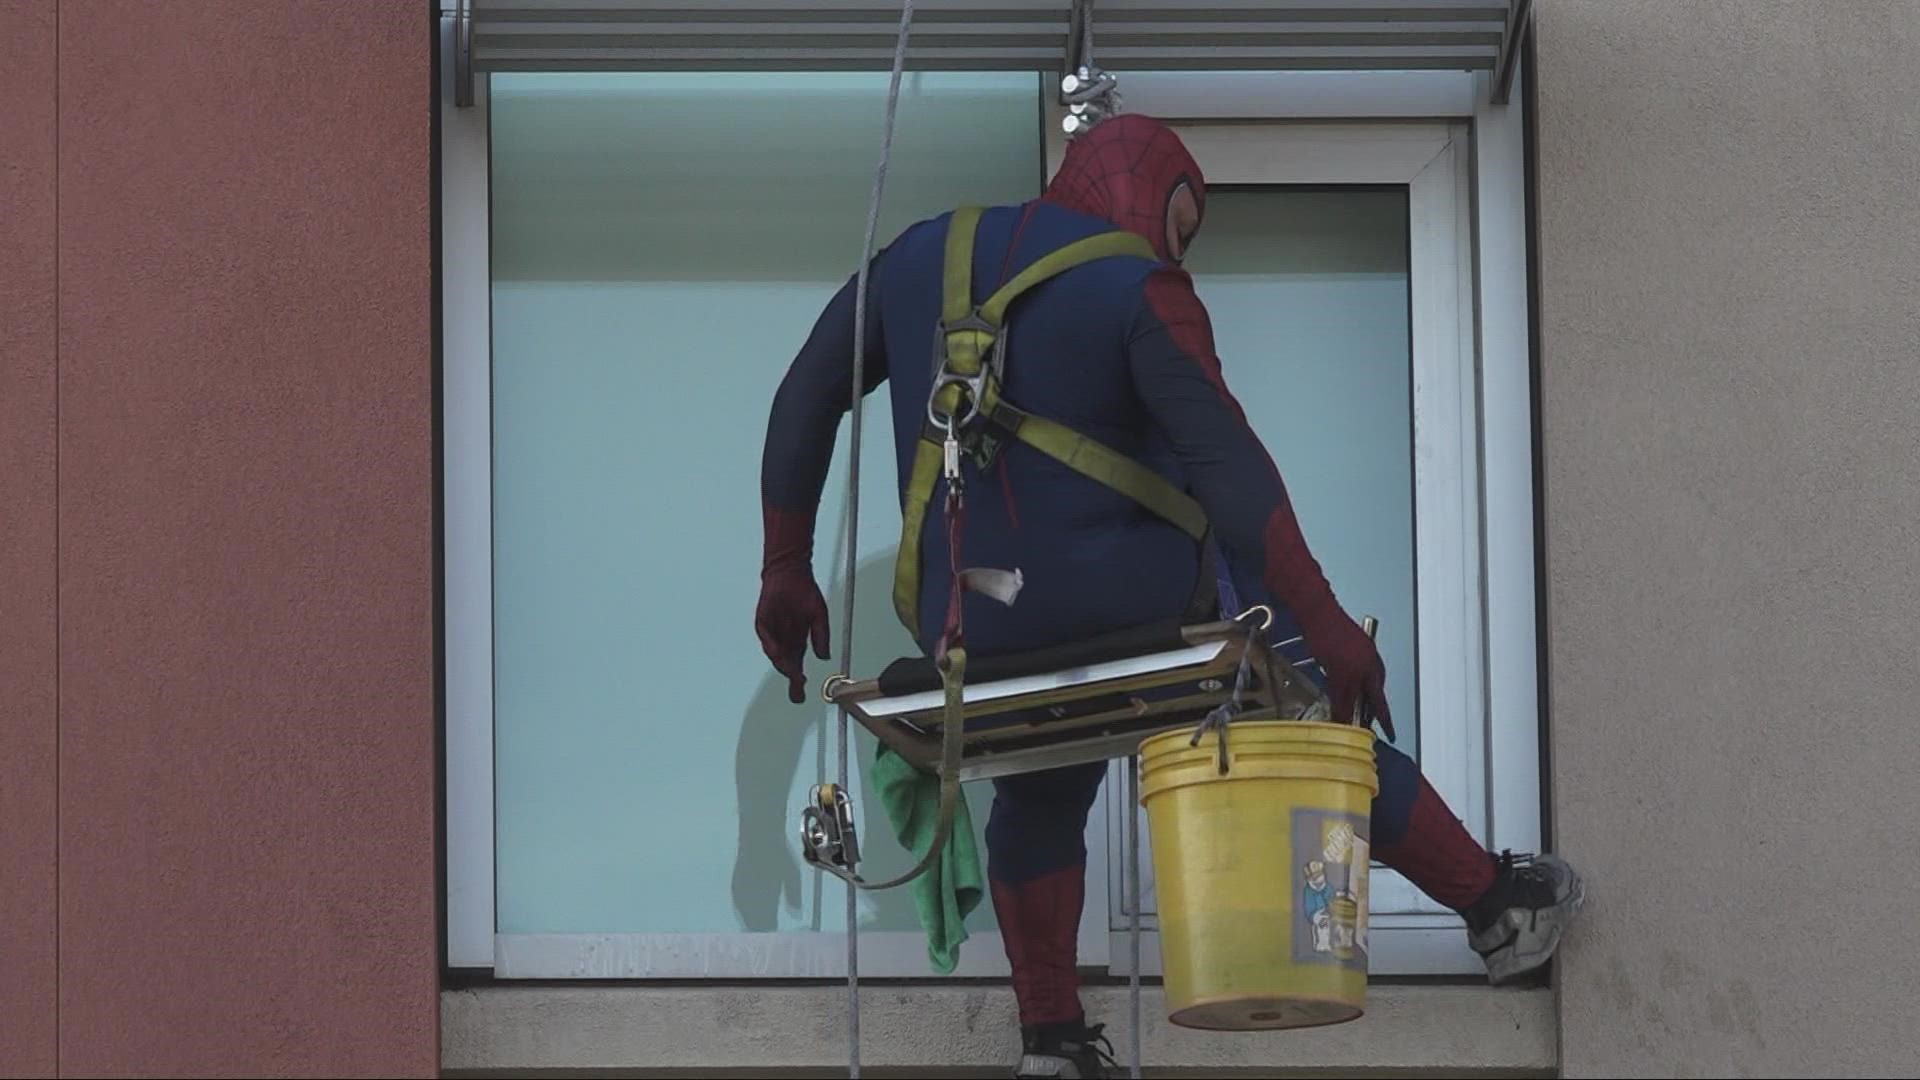 All of the best known Marvel superheroes hung off wires outside the windows of children staying at the Kaiser hospital.